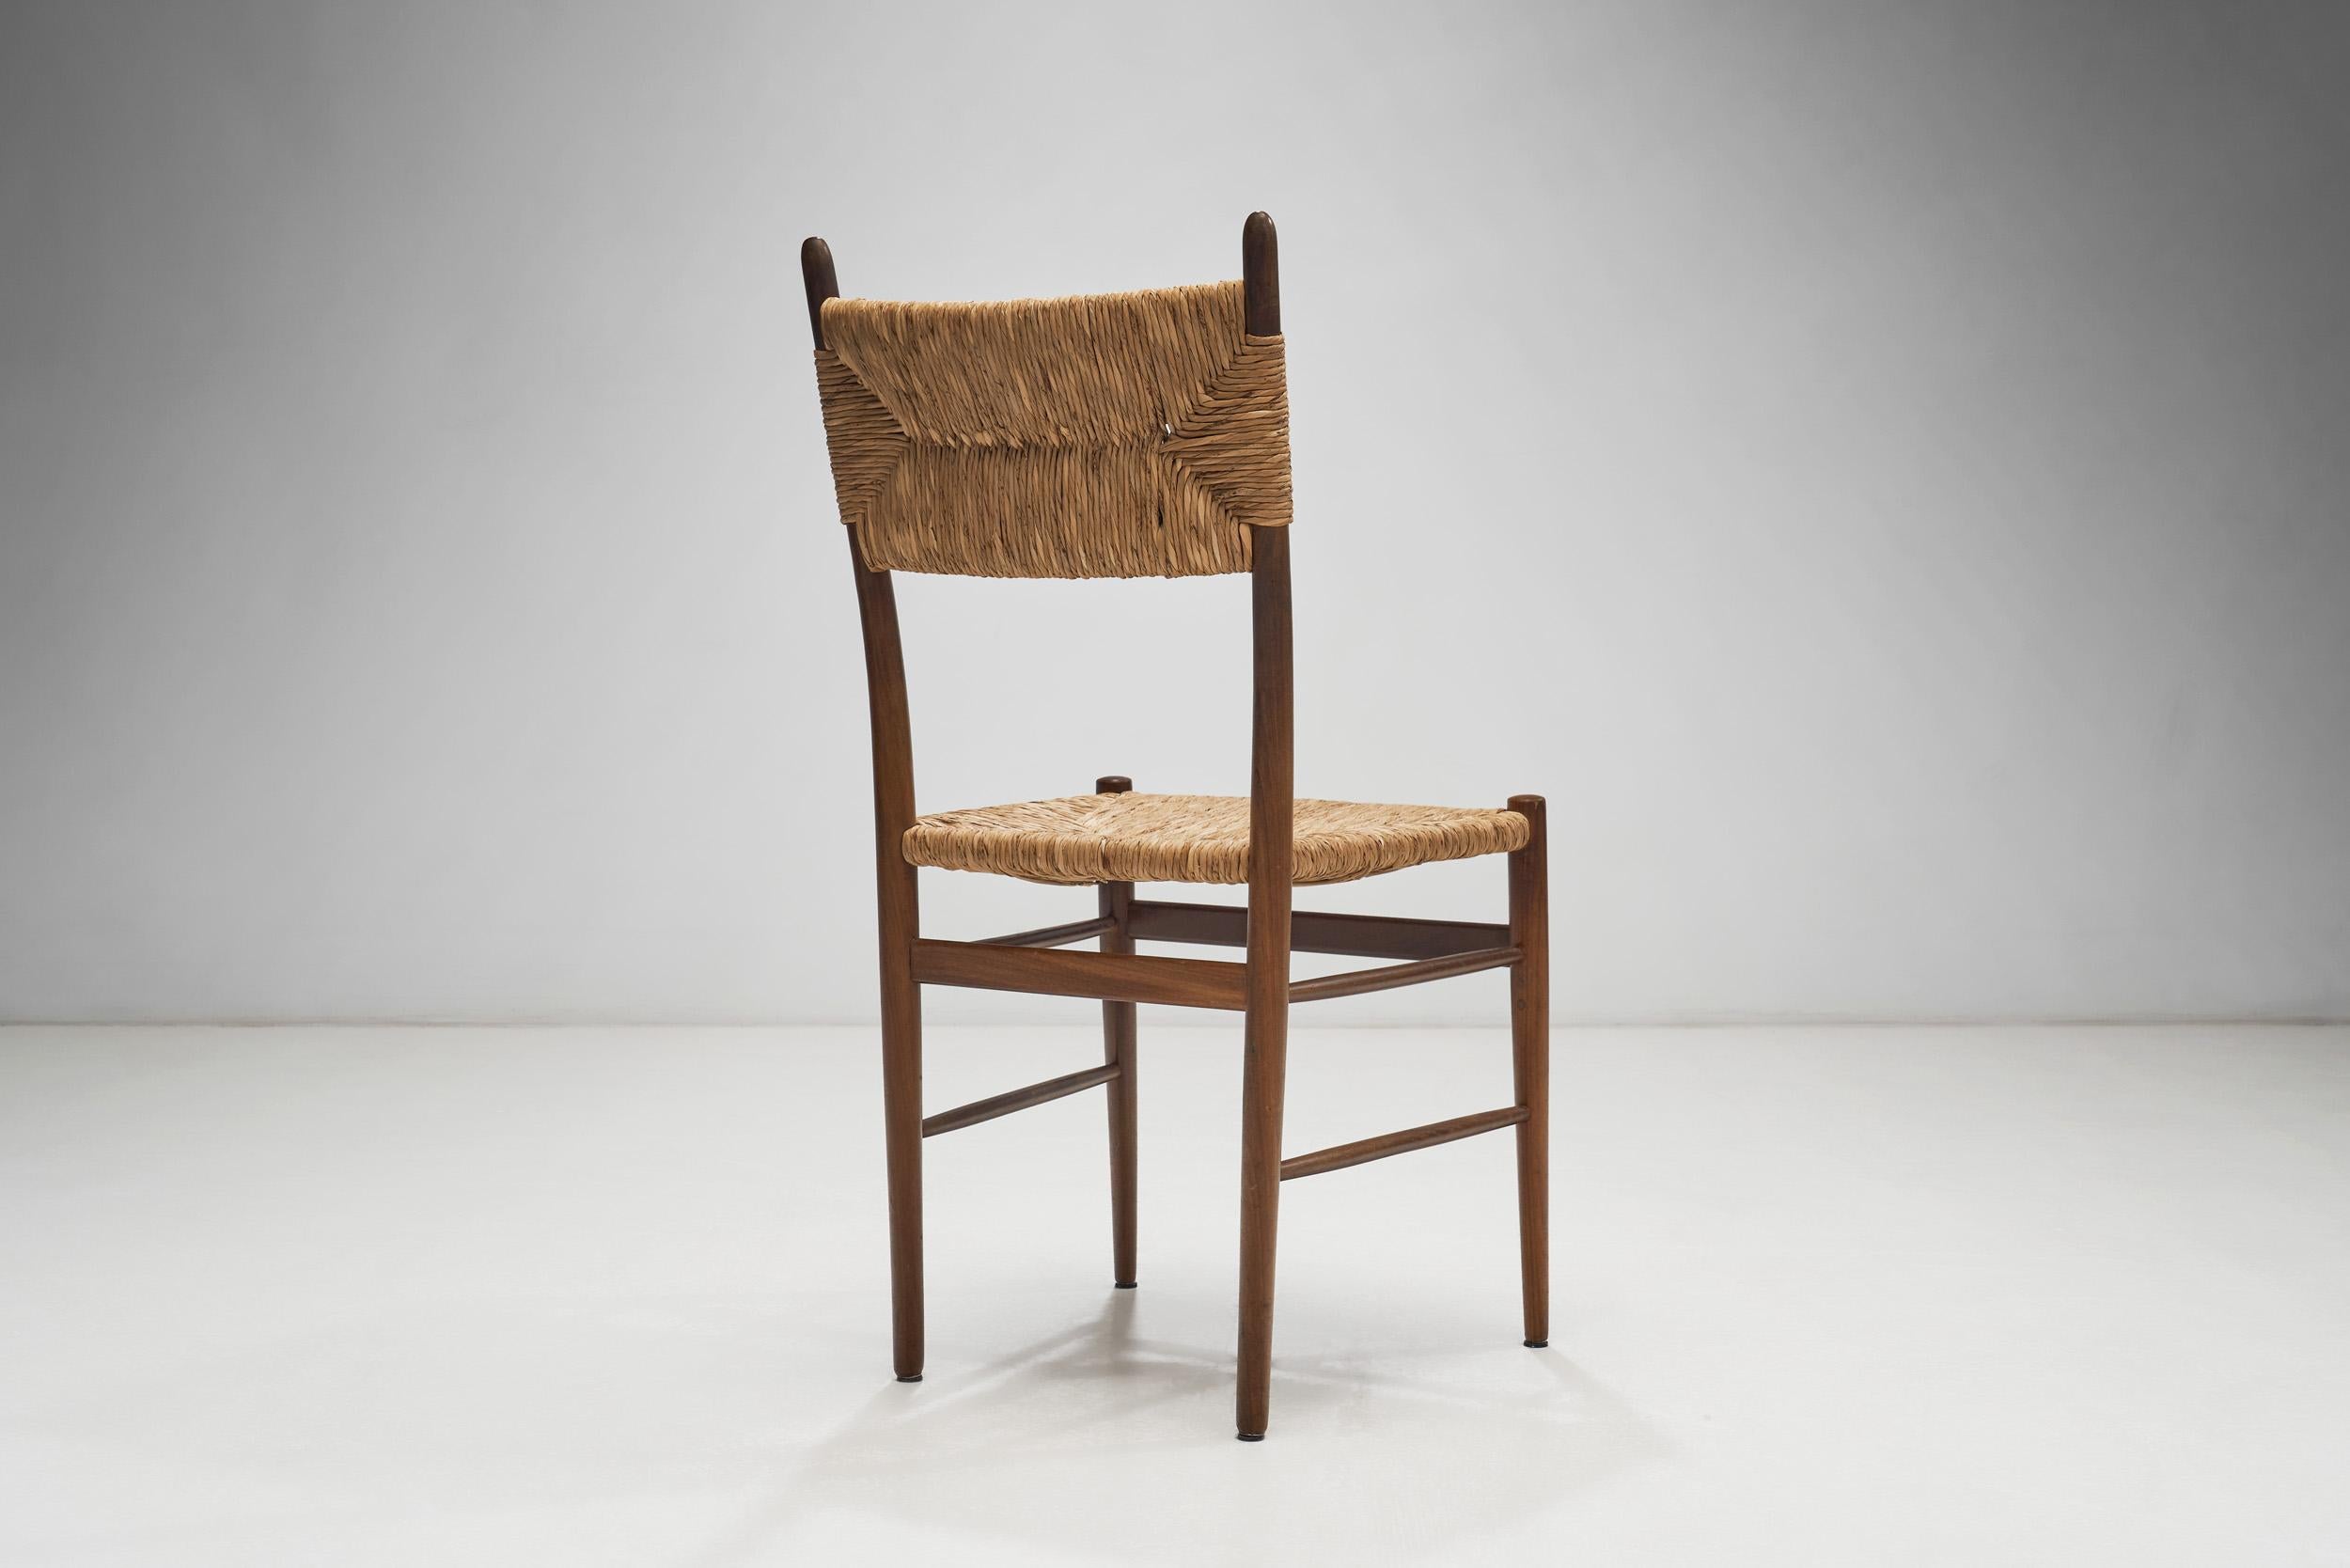 Mid-20th Century A Set of Four Dining Chairs with Woven Straw Seats and Backs, Europe ca 1950s